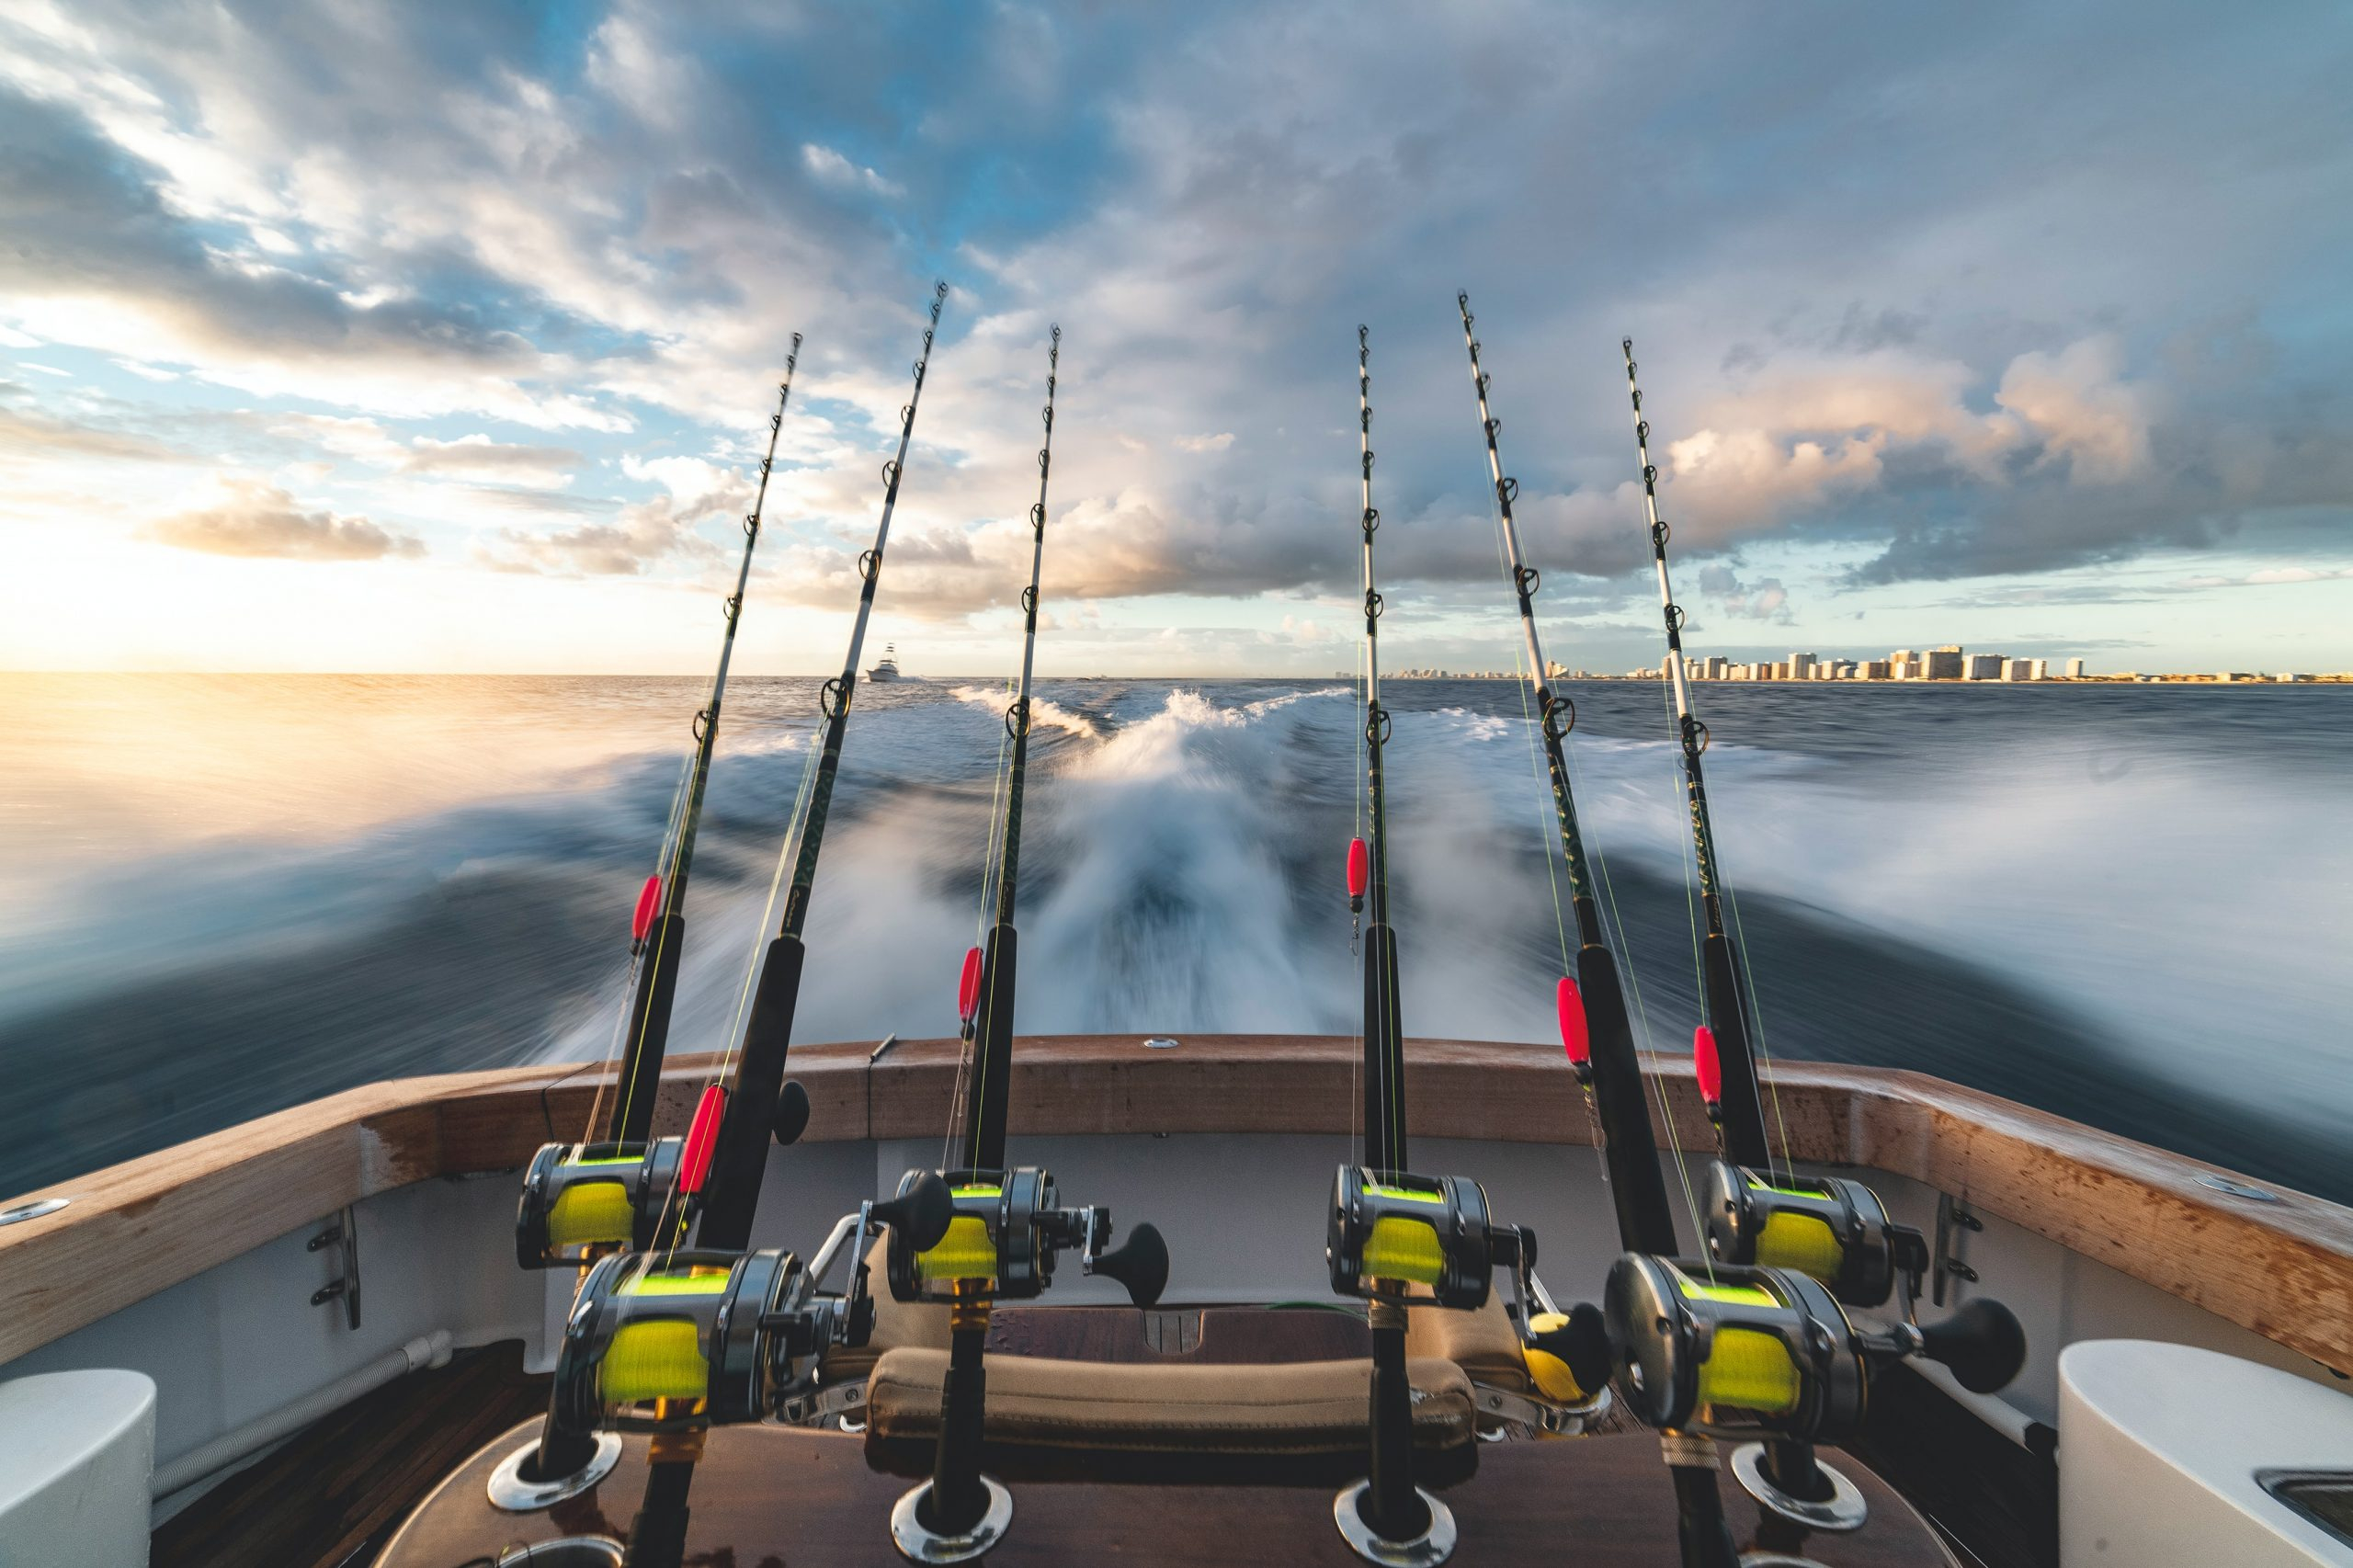 2560x1706 The 10 Best Destinations for Saltwater Fishing in the US